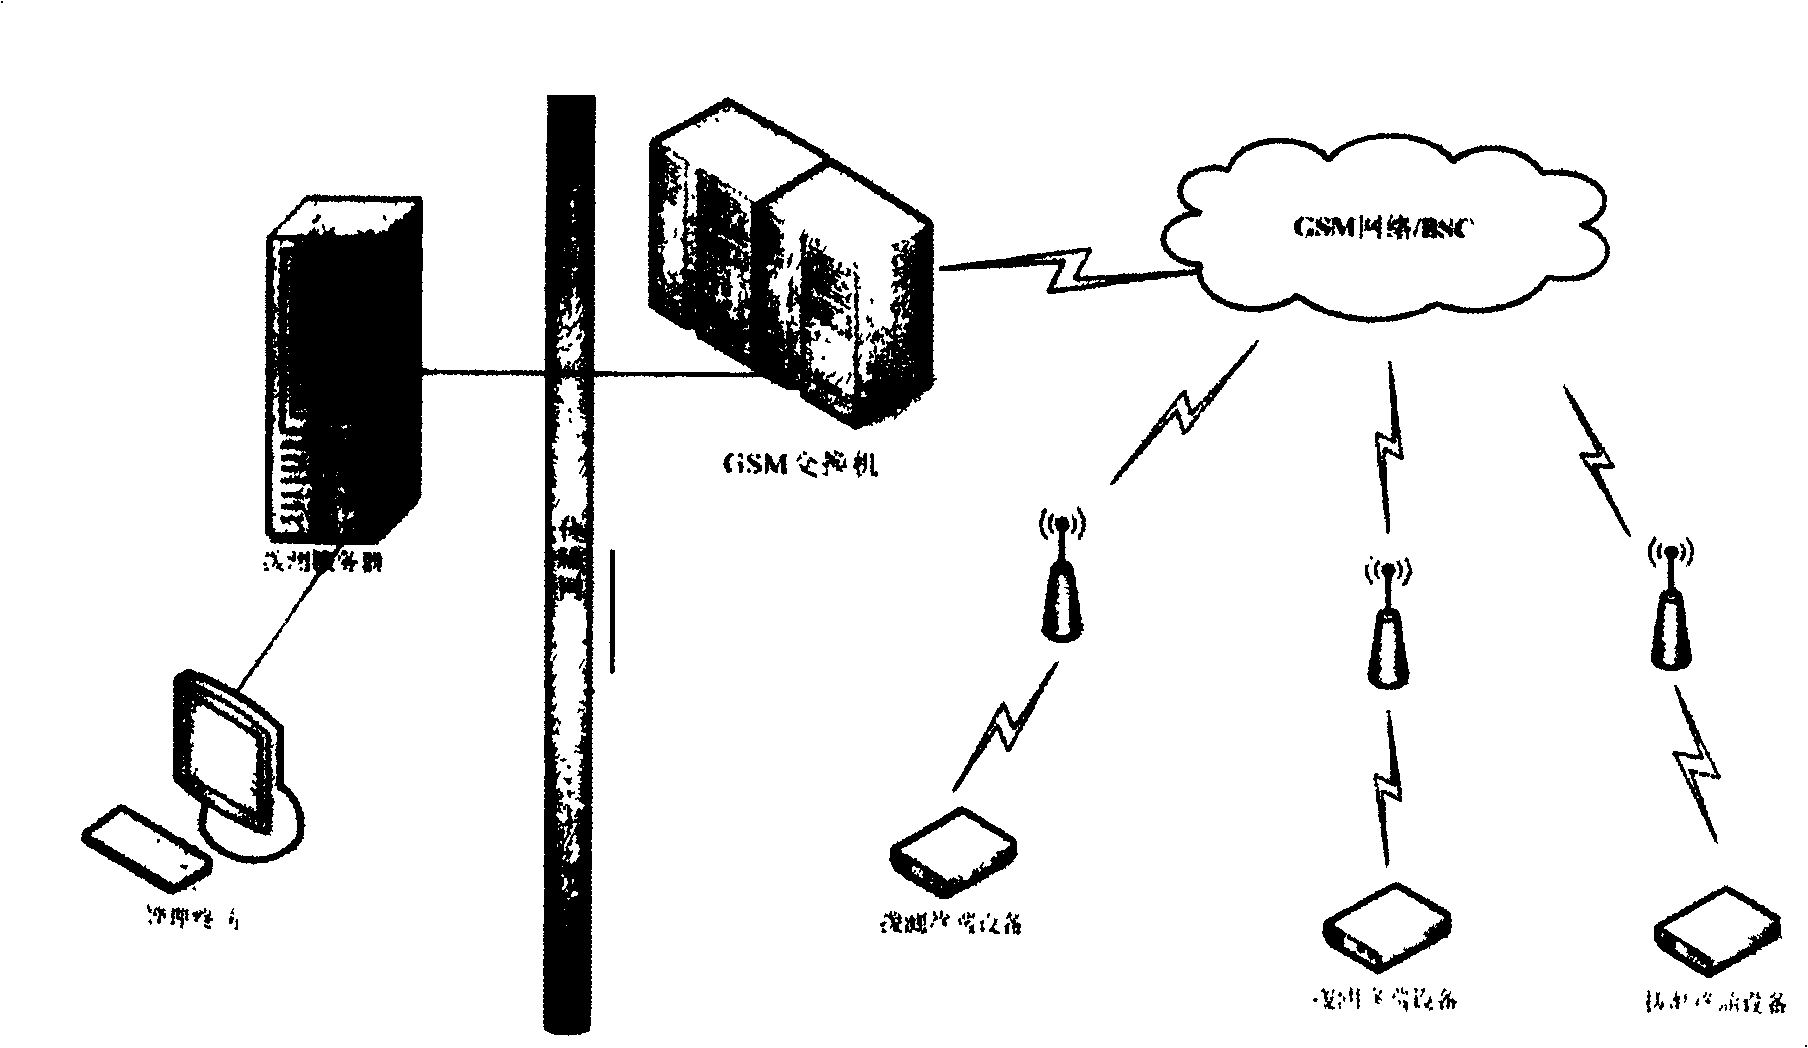 Method for cross-testing validating reliability in wireless network central monitoring service